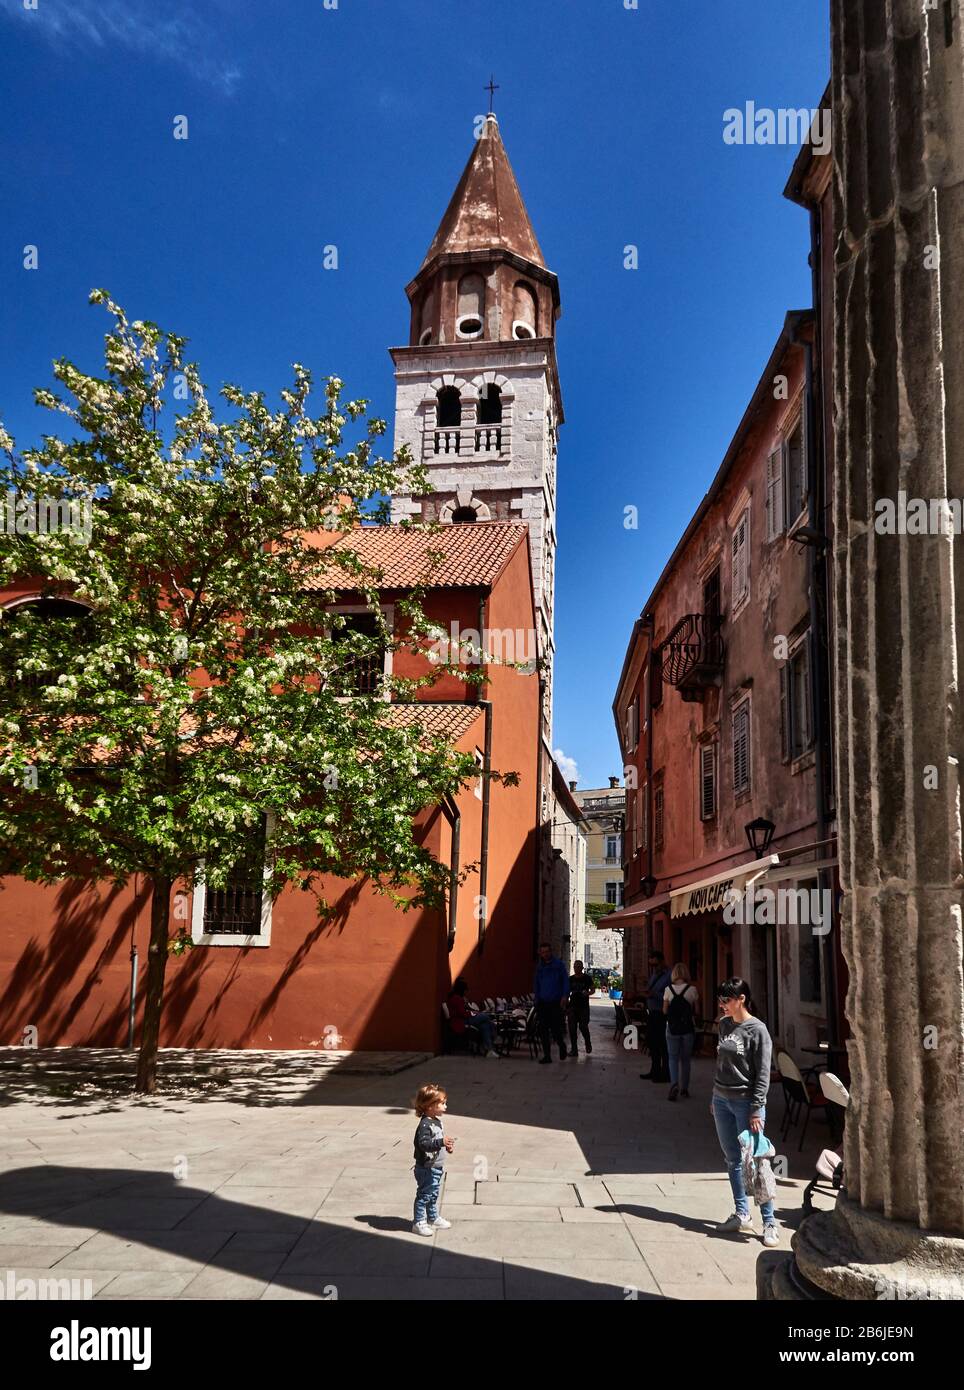 Zadar, Dalmatia province, Croatia, street scene in front of a traditional painted houses, square and Smijanica street paved with limestone and St Simeon's churchin the old tow, Zadar is an adorable fortified city, Stock Photo